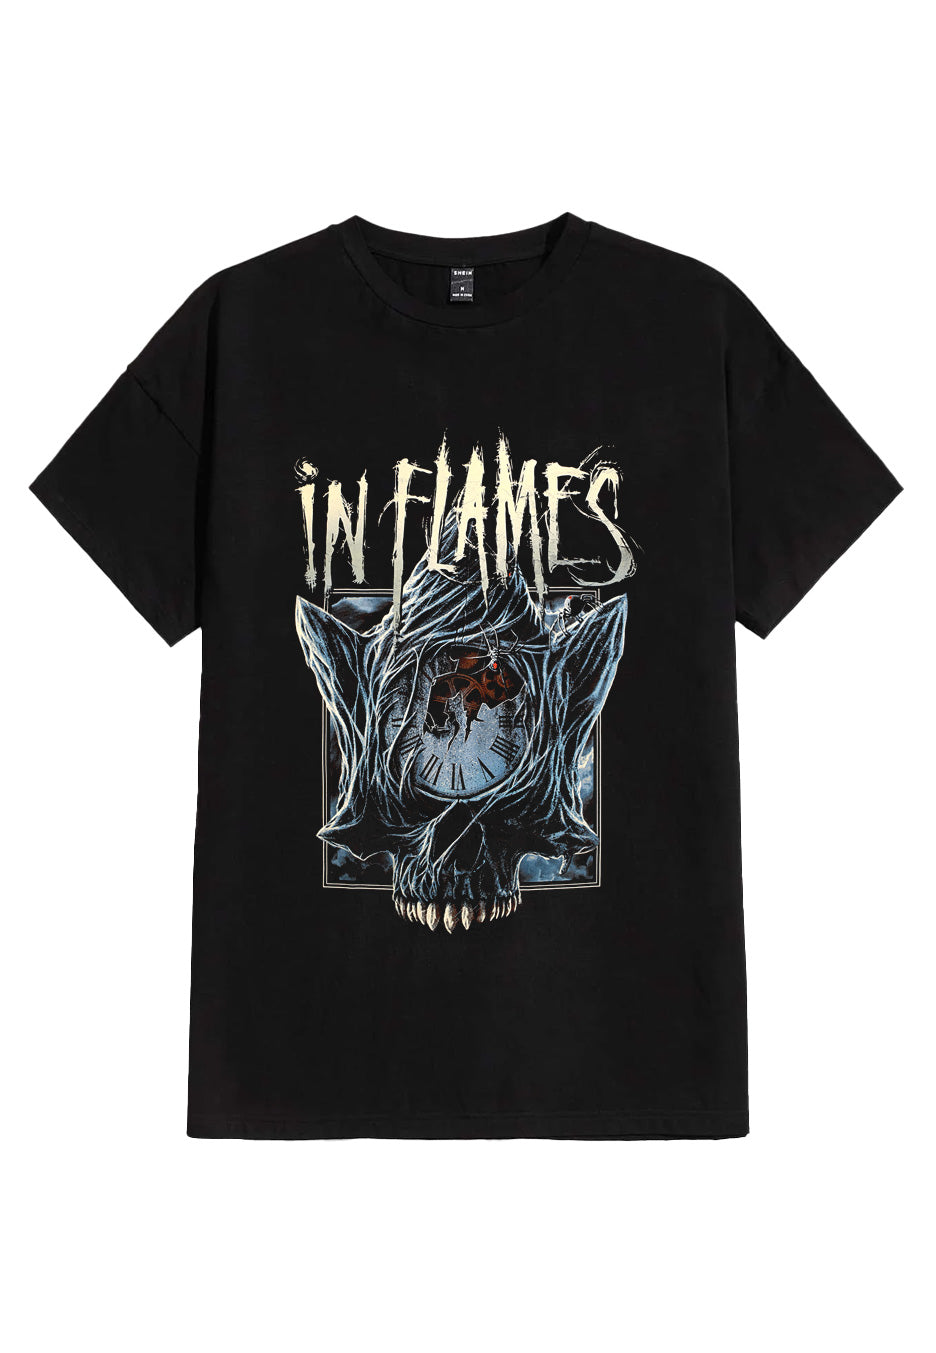 In Flames - The Great Deceiver - T-Shirt